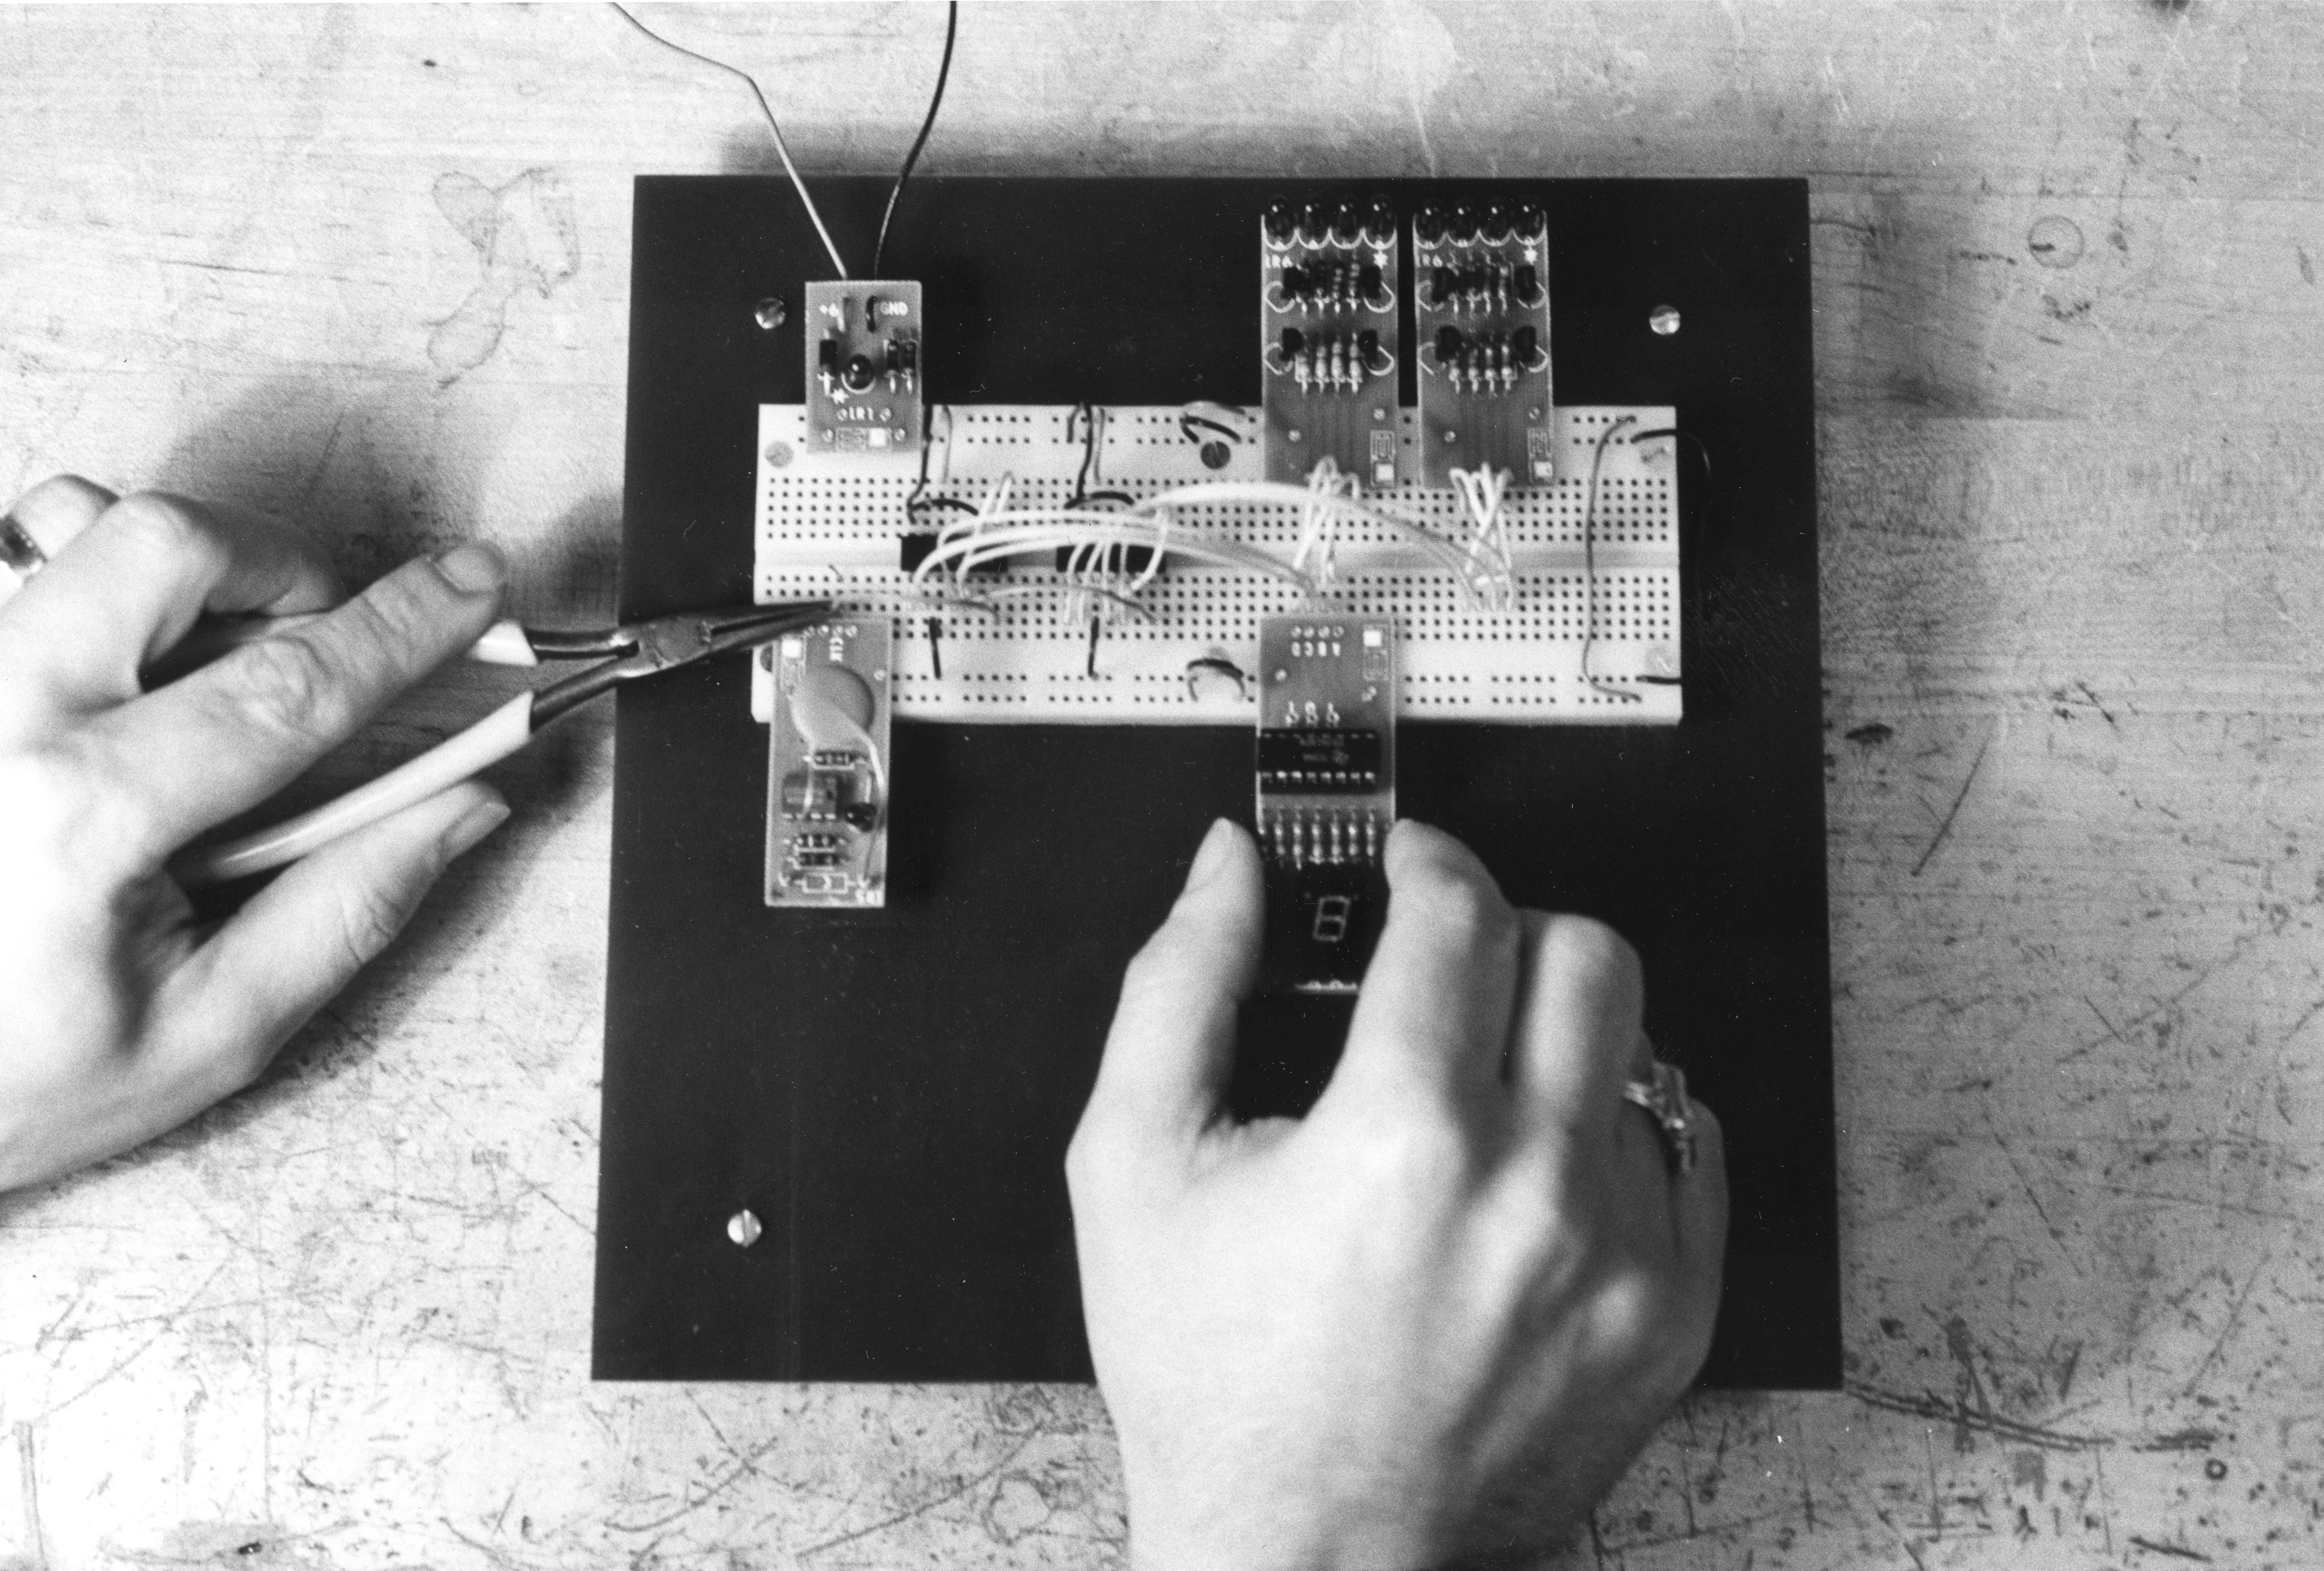 Hand-assembly of a computer